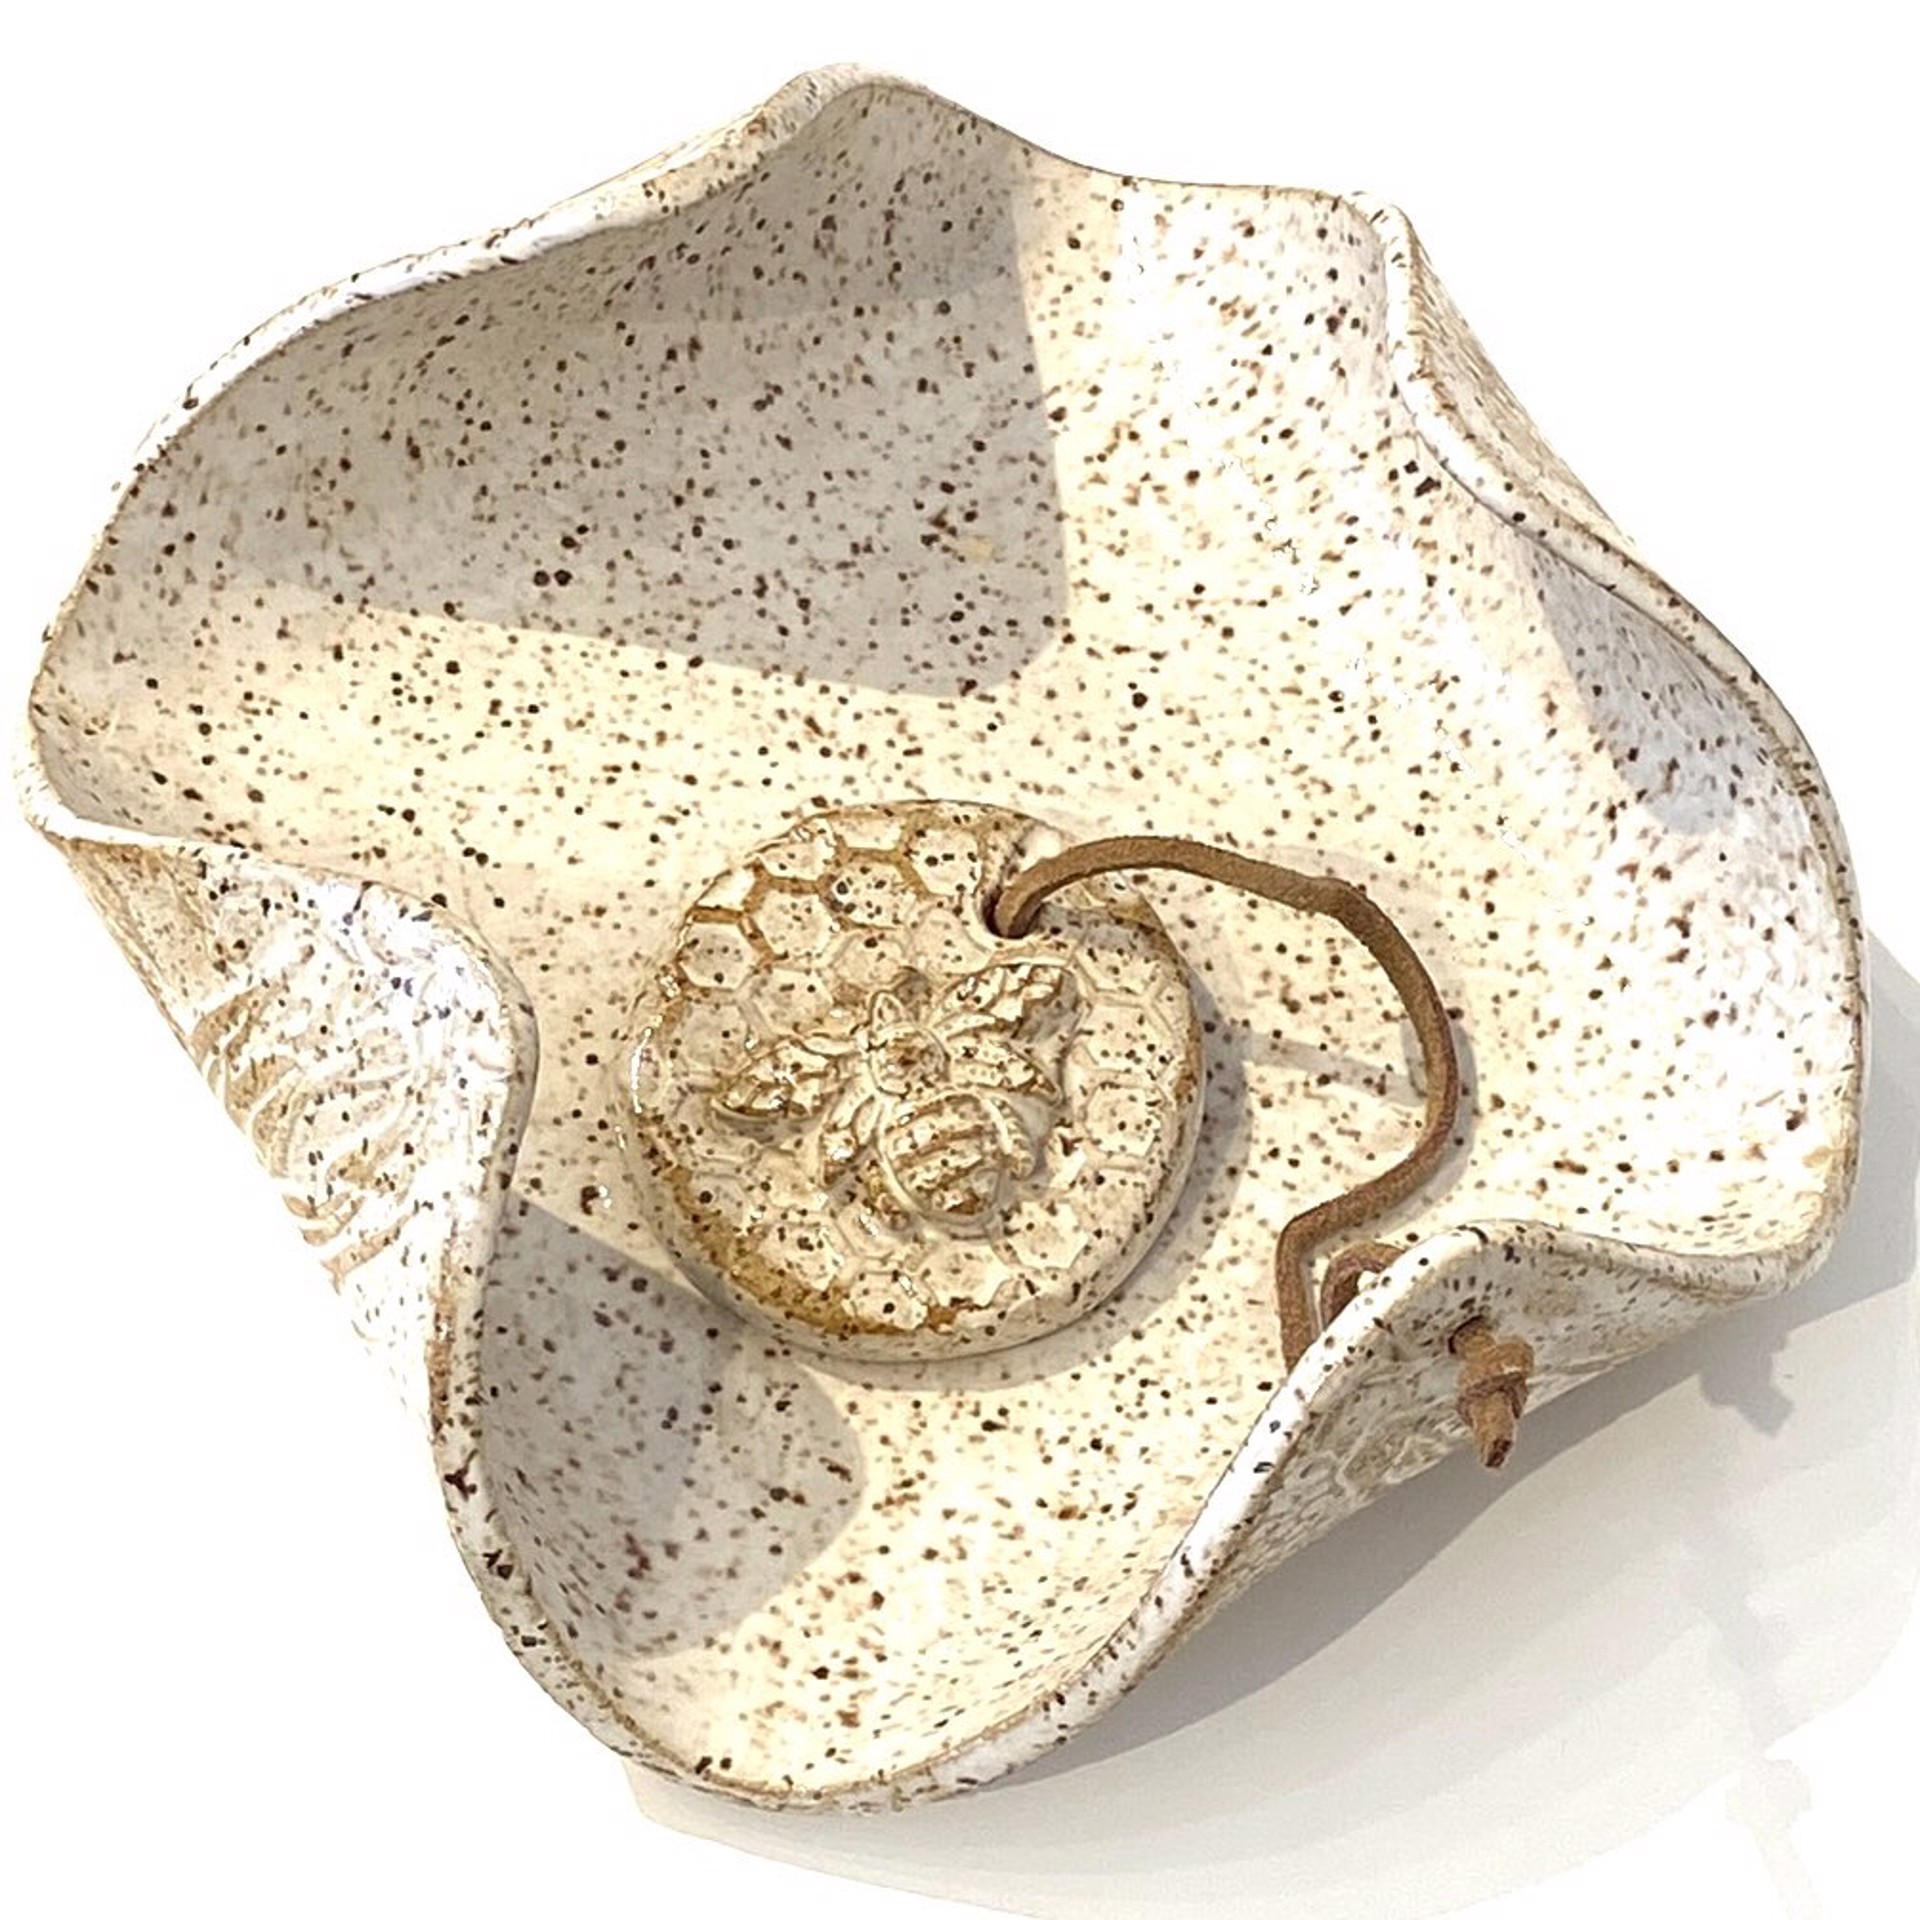 Napkin Holder with Bee and Honeycomb Weight by Barbara Bergwerf, Ceramics